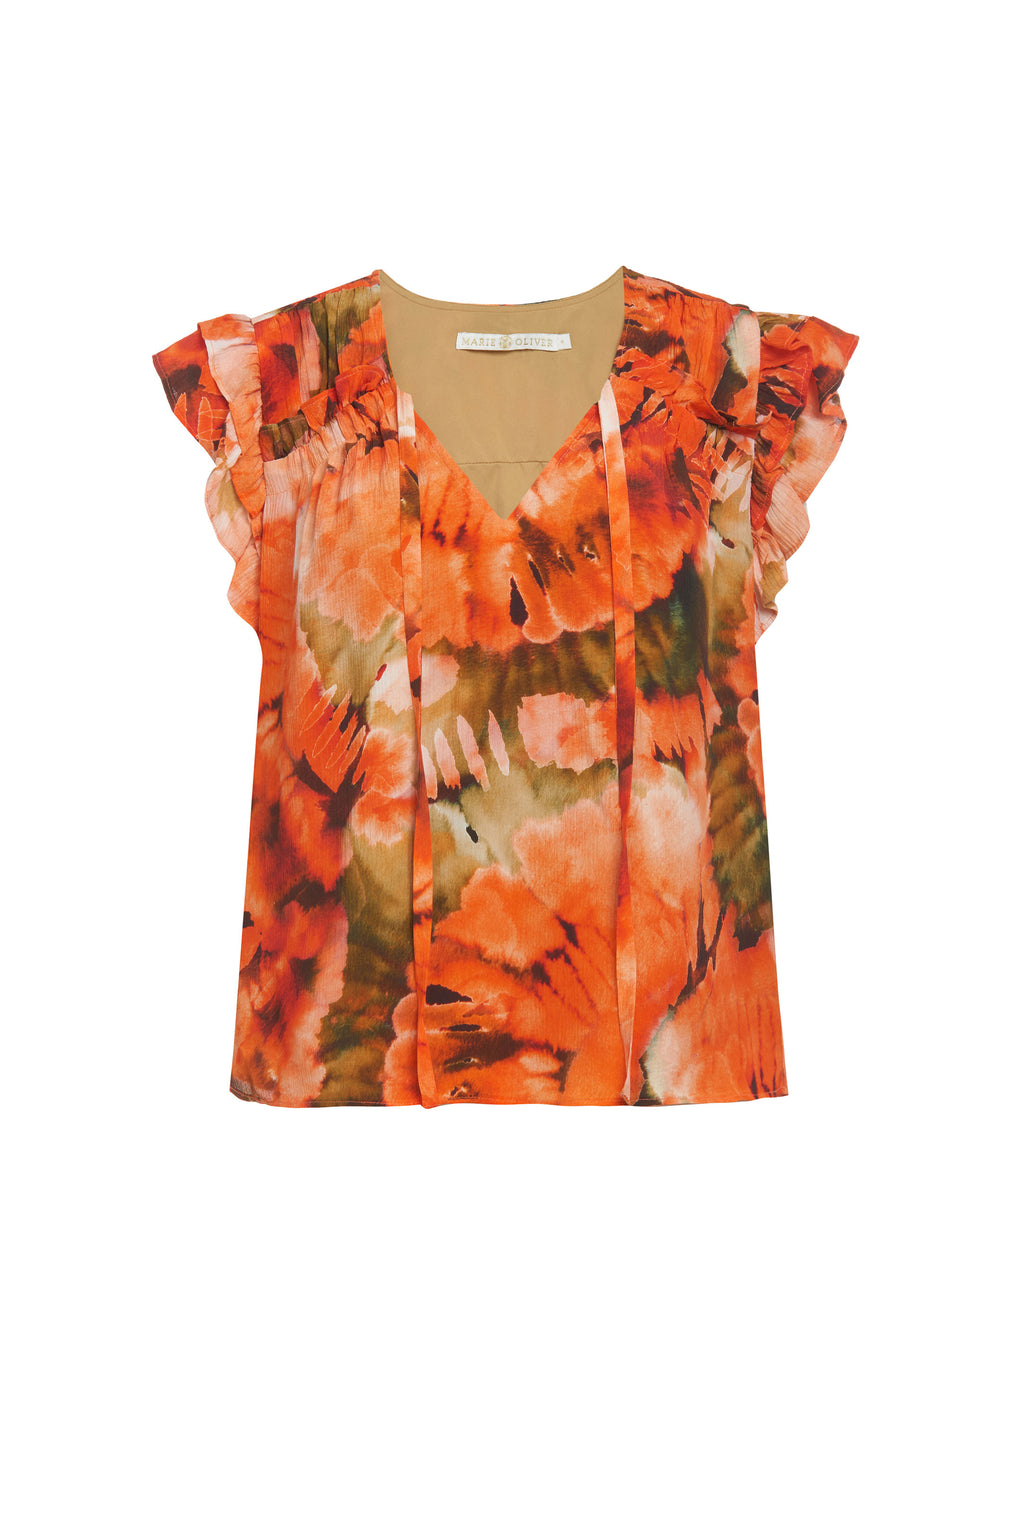 Orange and green floral short sleeve shirt with a v-neckline and adjustable ties on each side